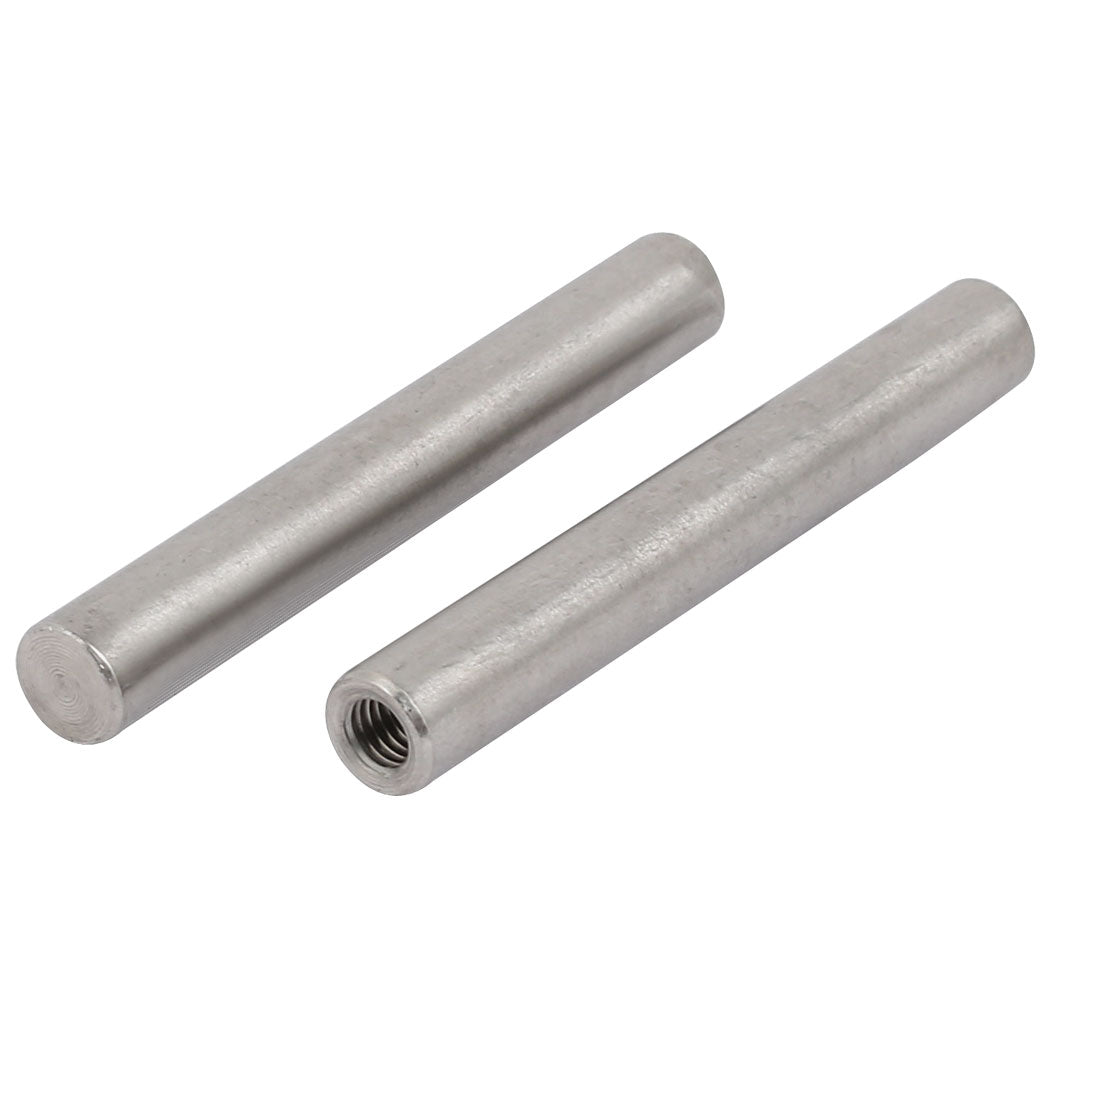 uxcell Uxcell 304 Stainless Steel M5 Female Thread 8mm x 60mm Cylindrical Dowel Pin 2pcs